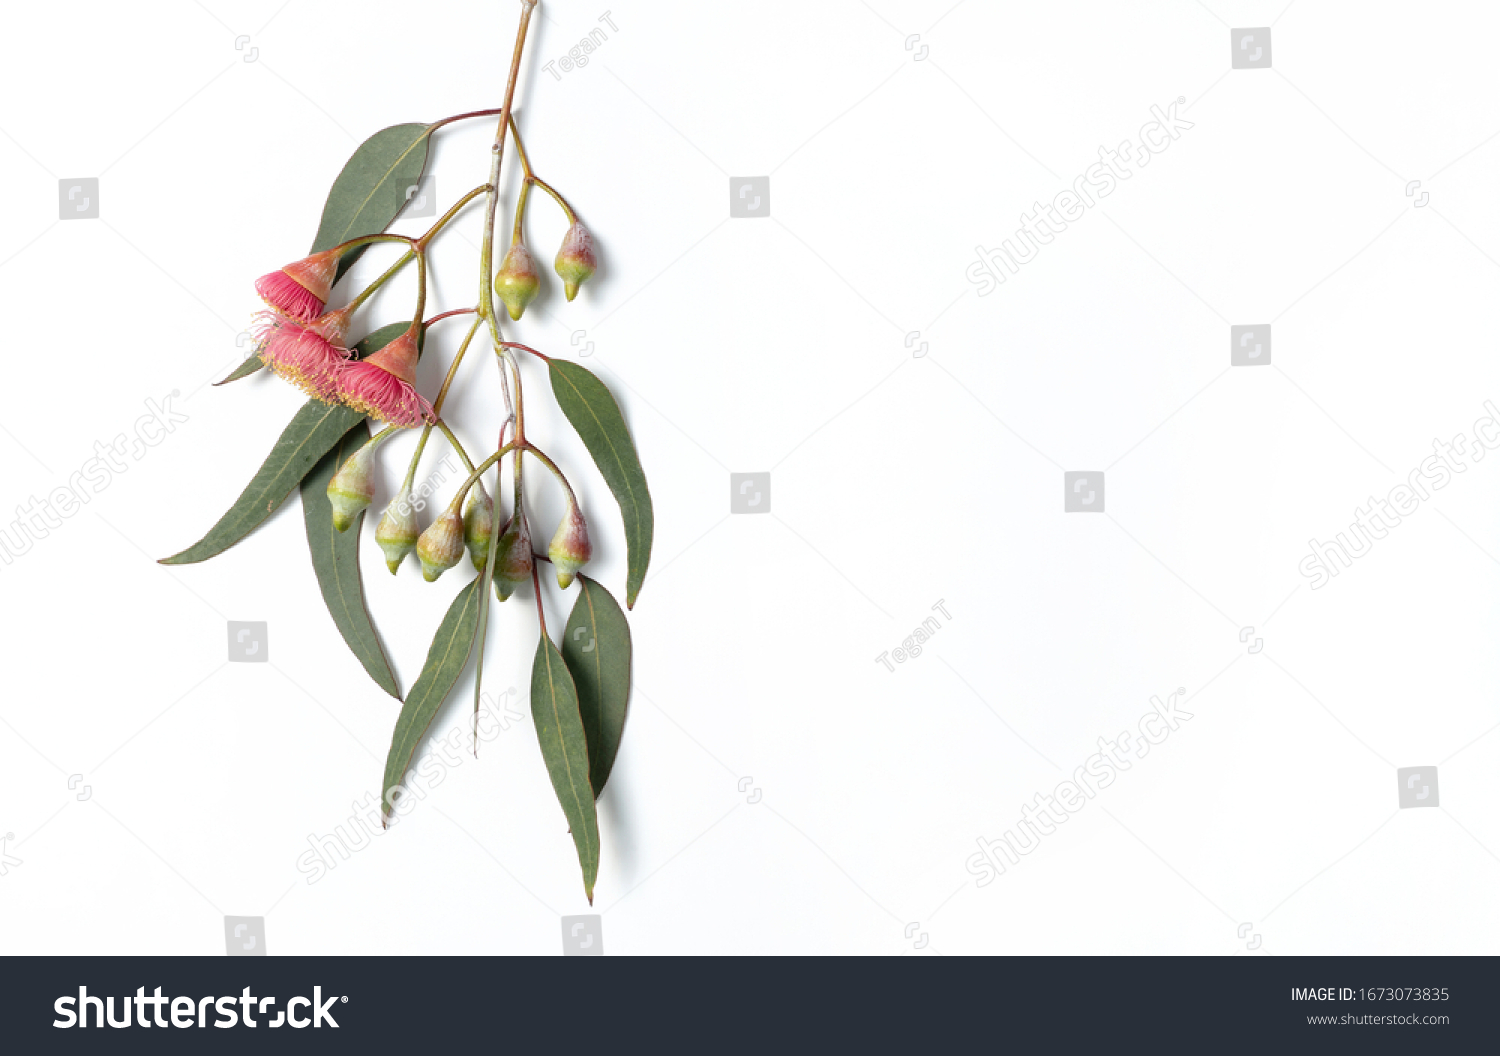 Australian native eucalyptus leaves and flowering gum nuts on a white background photographed from above. #1673073835